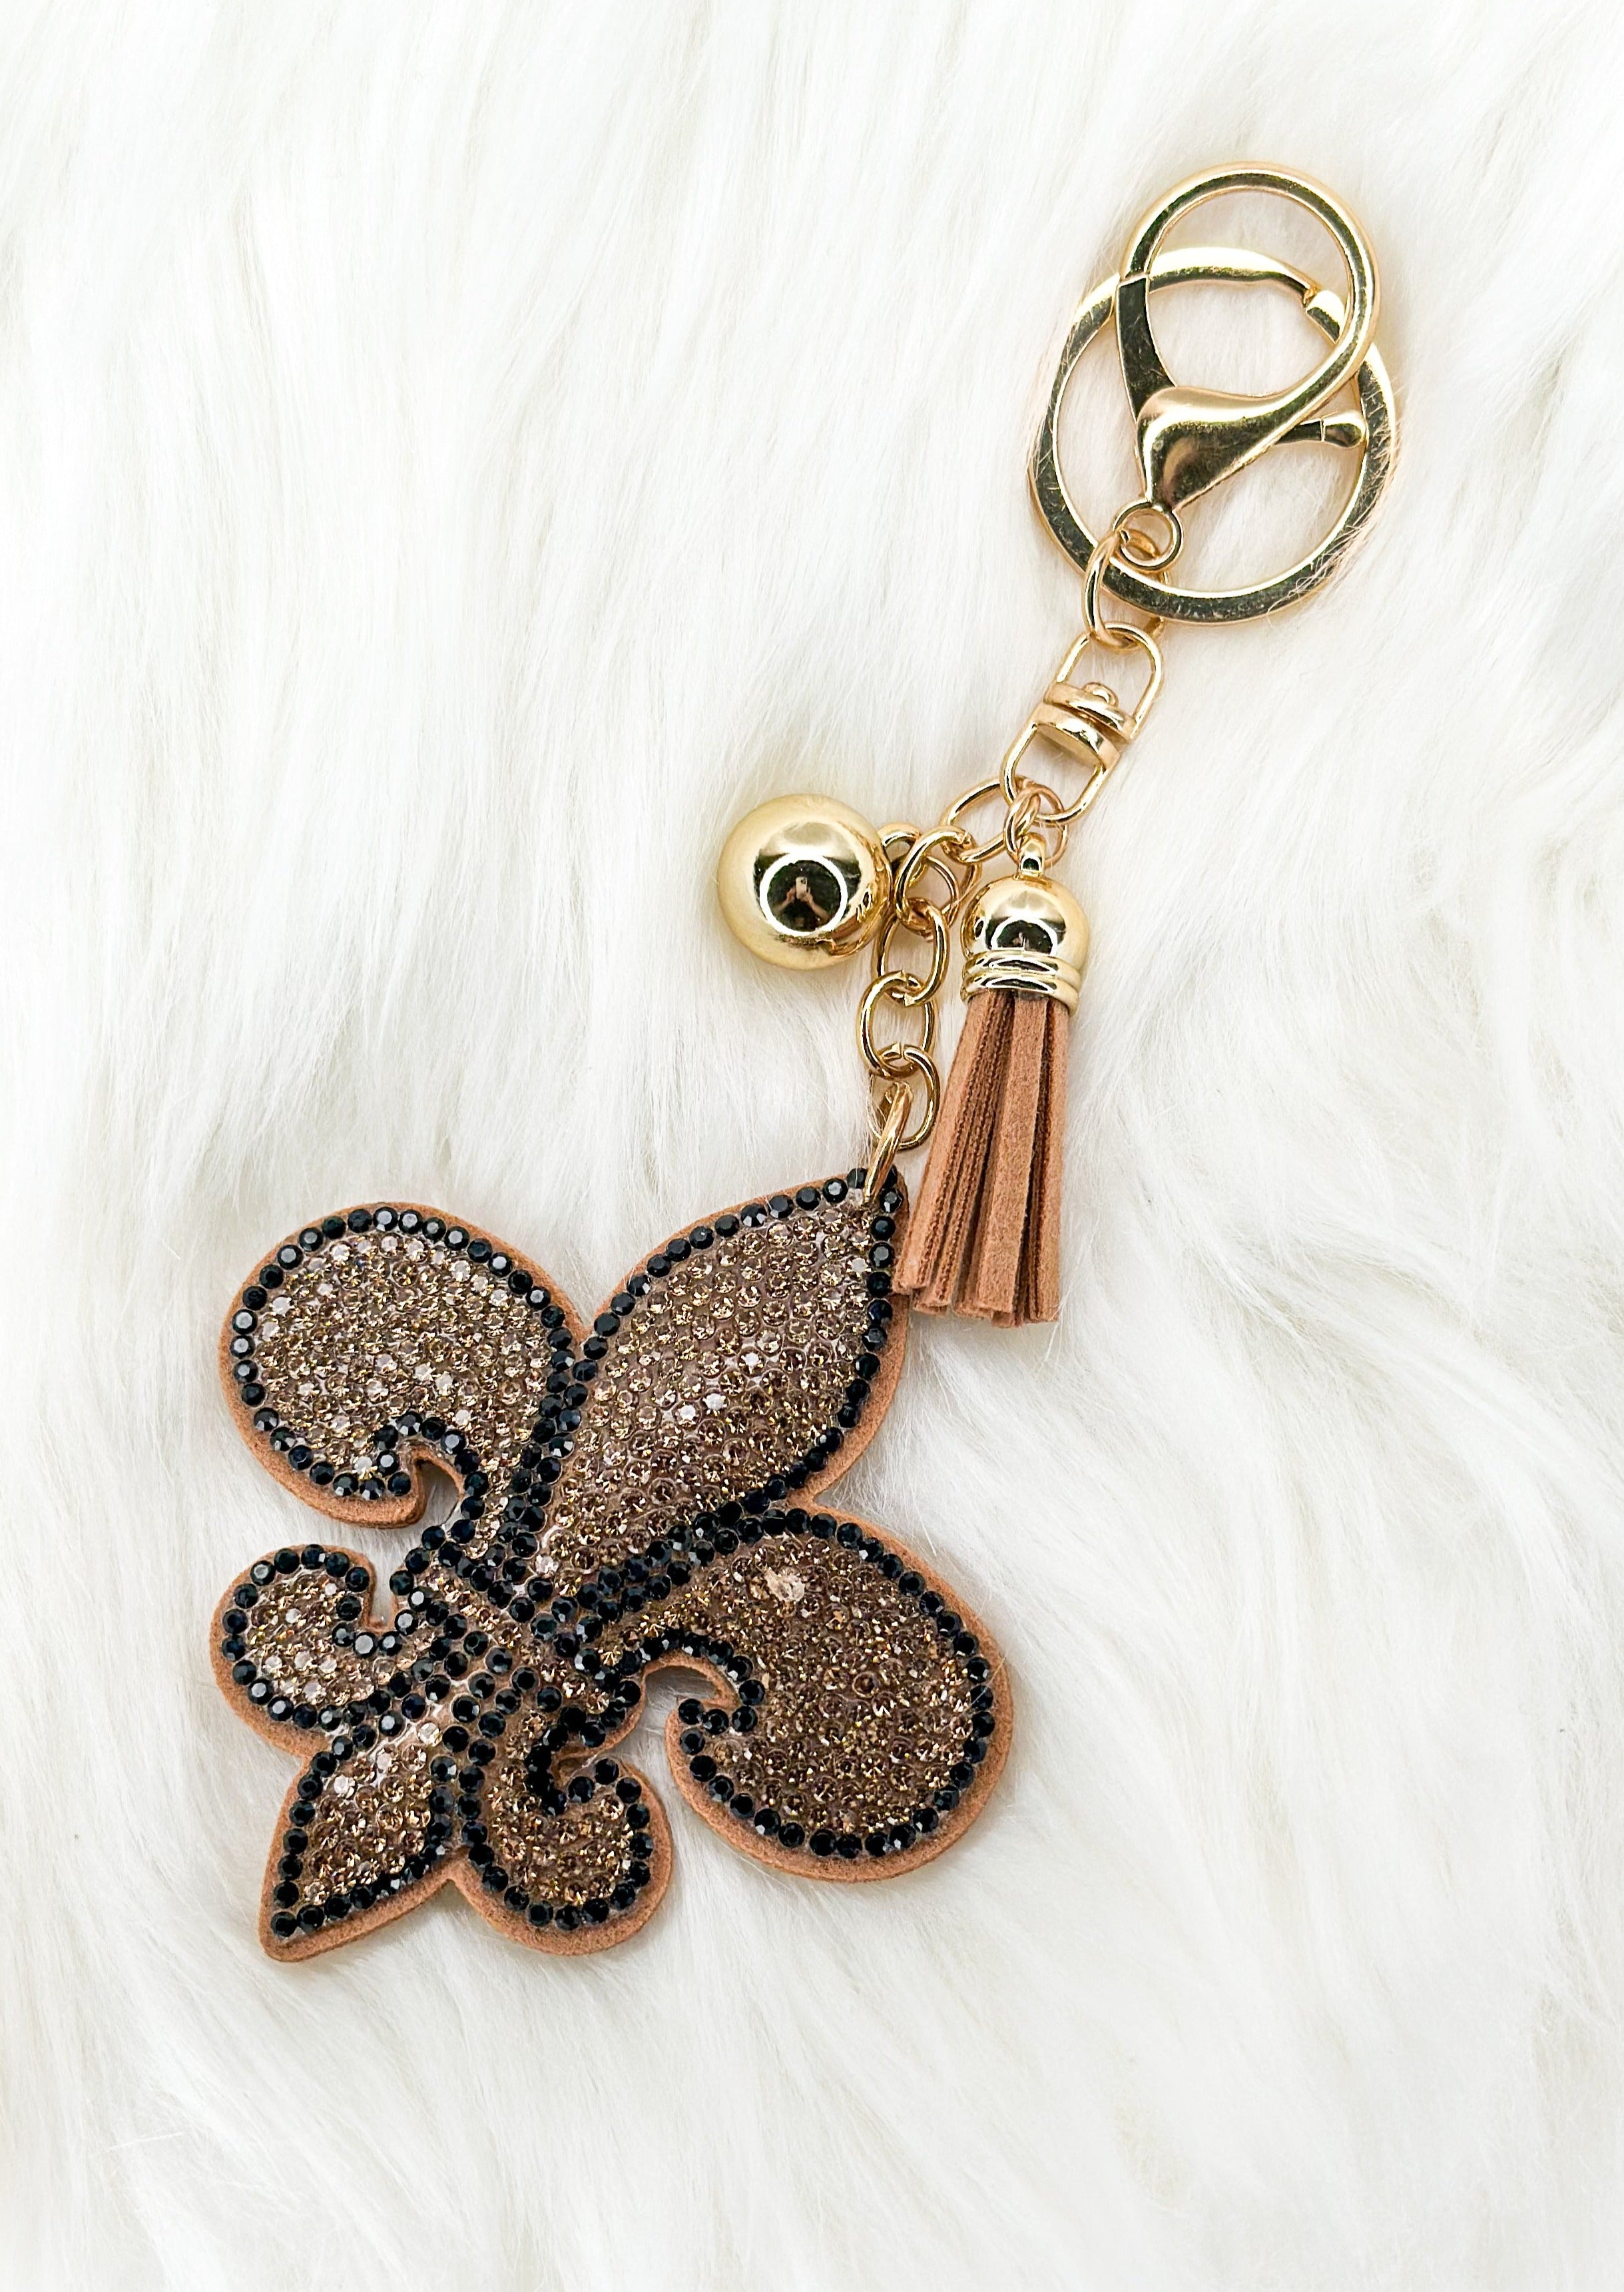 Fleur de lis sparkly keychain with gold tassel and hardware.